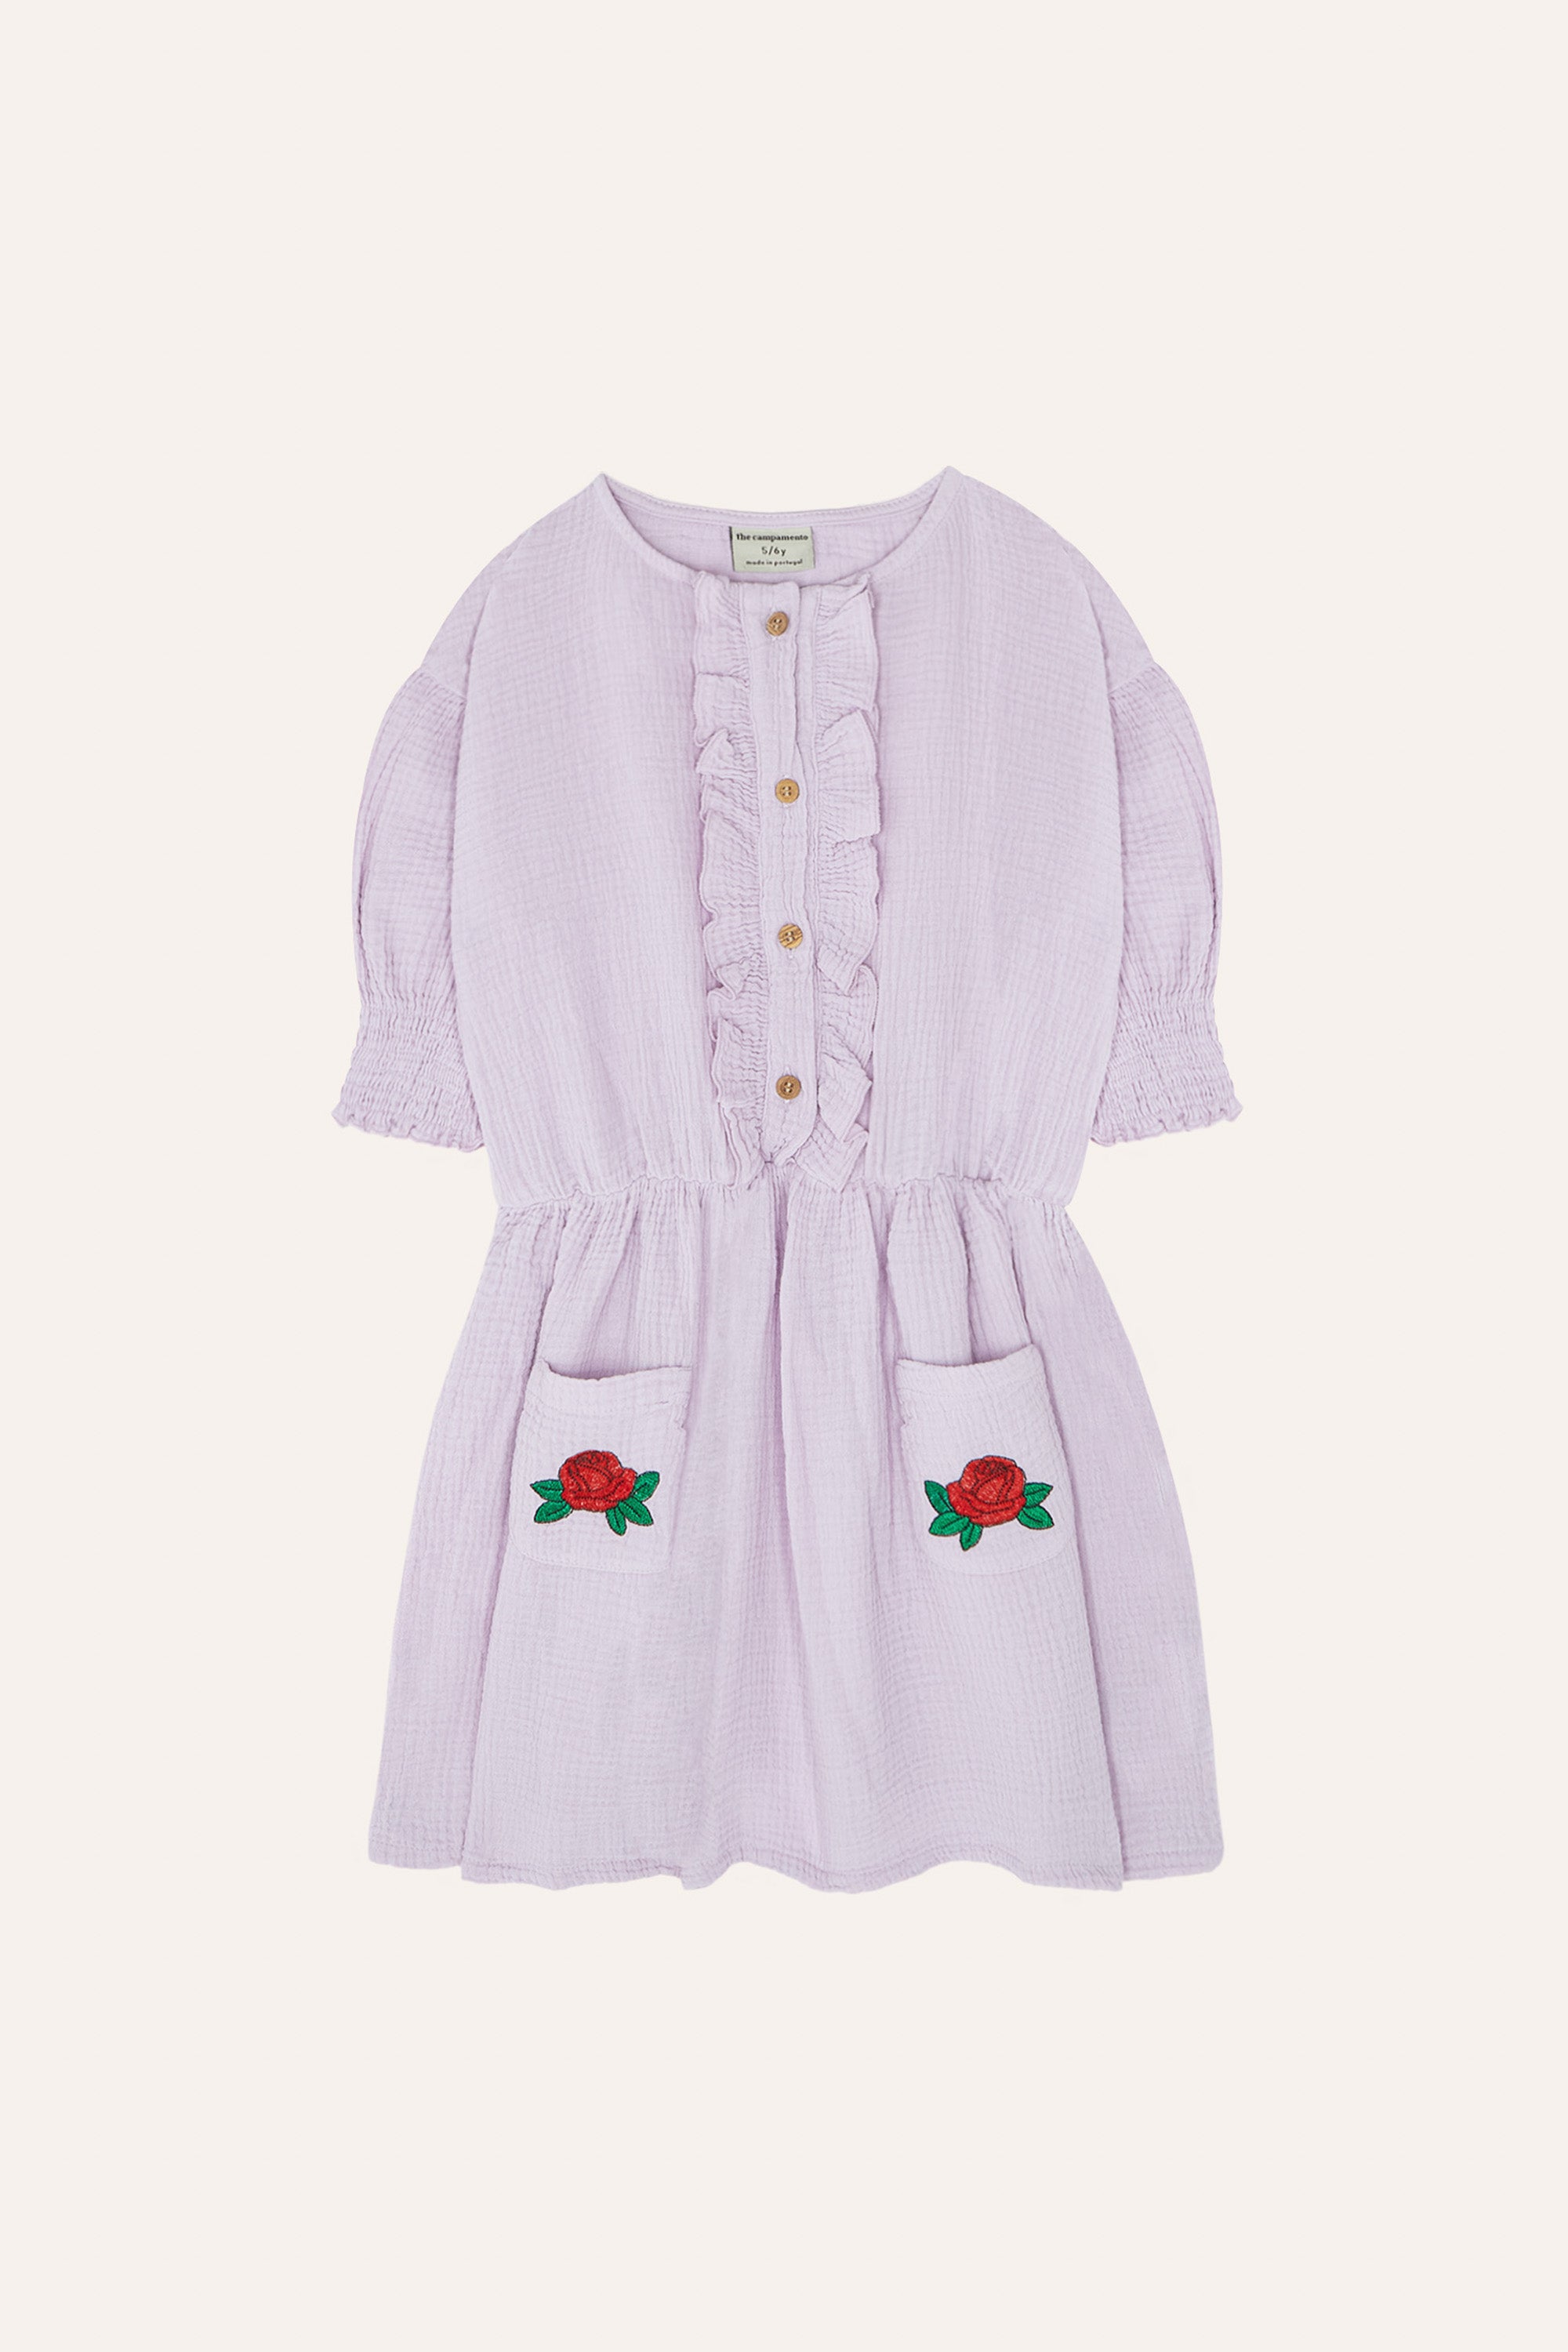 The Campamento - flowers embroidery kids dress